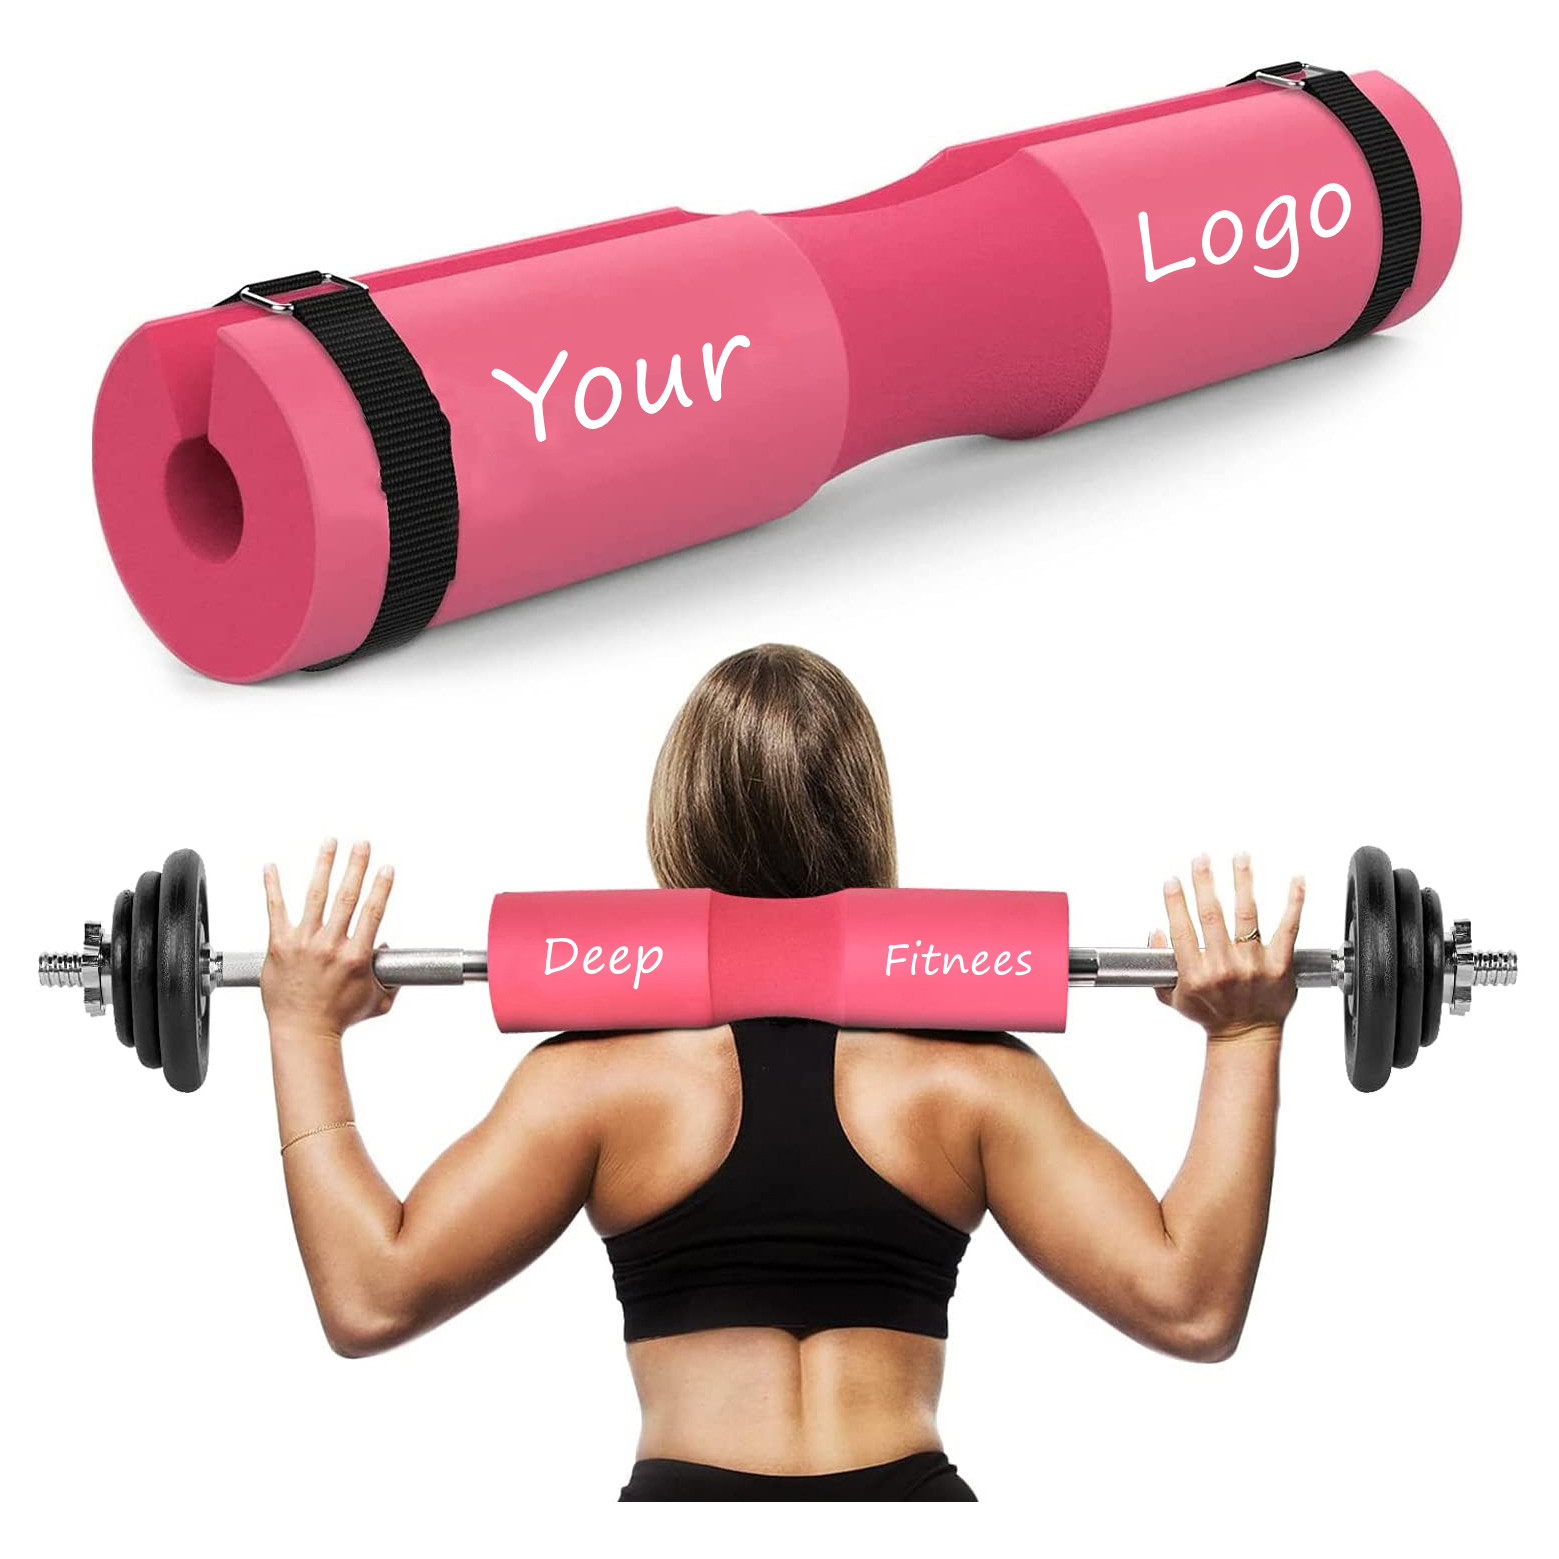 Non Slip Barbell Pad Custom logo color Foam Sponge Barbell Pad Squat Pad for Squats, Lunges and Hip Thrusts Gym fitness